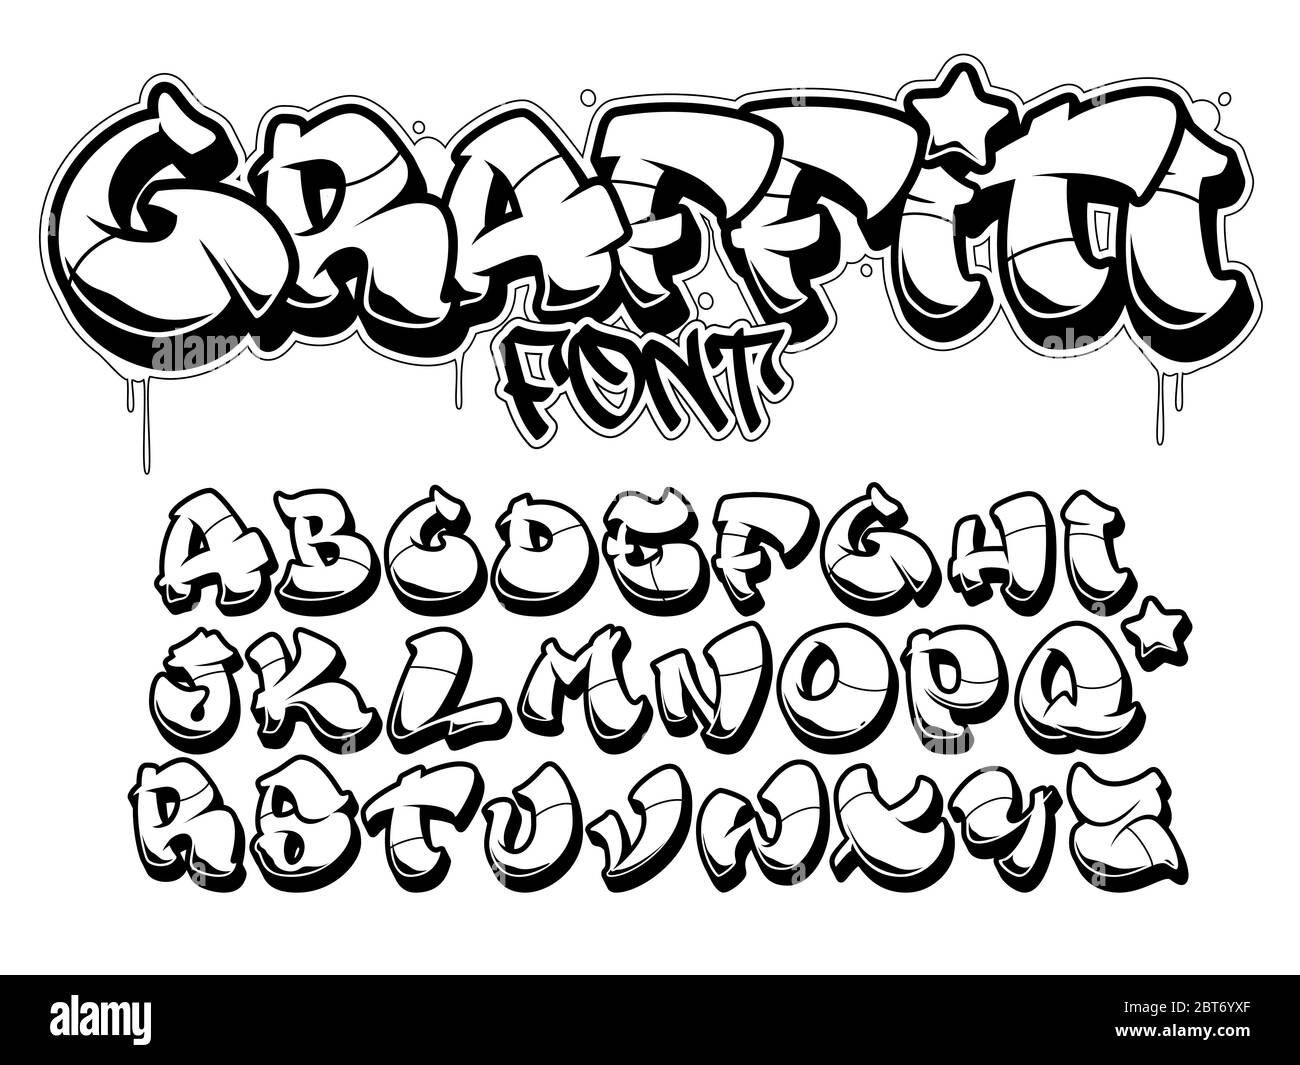 Vector font in old school graffiti style. Capital letters alphabet